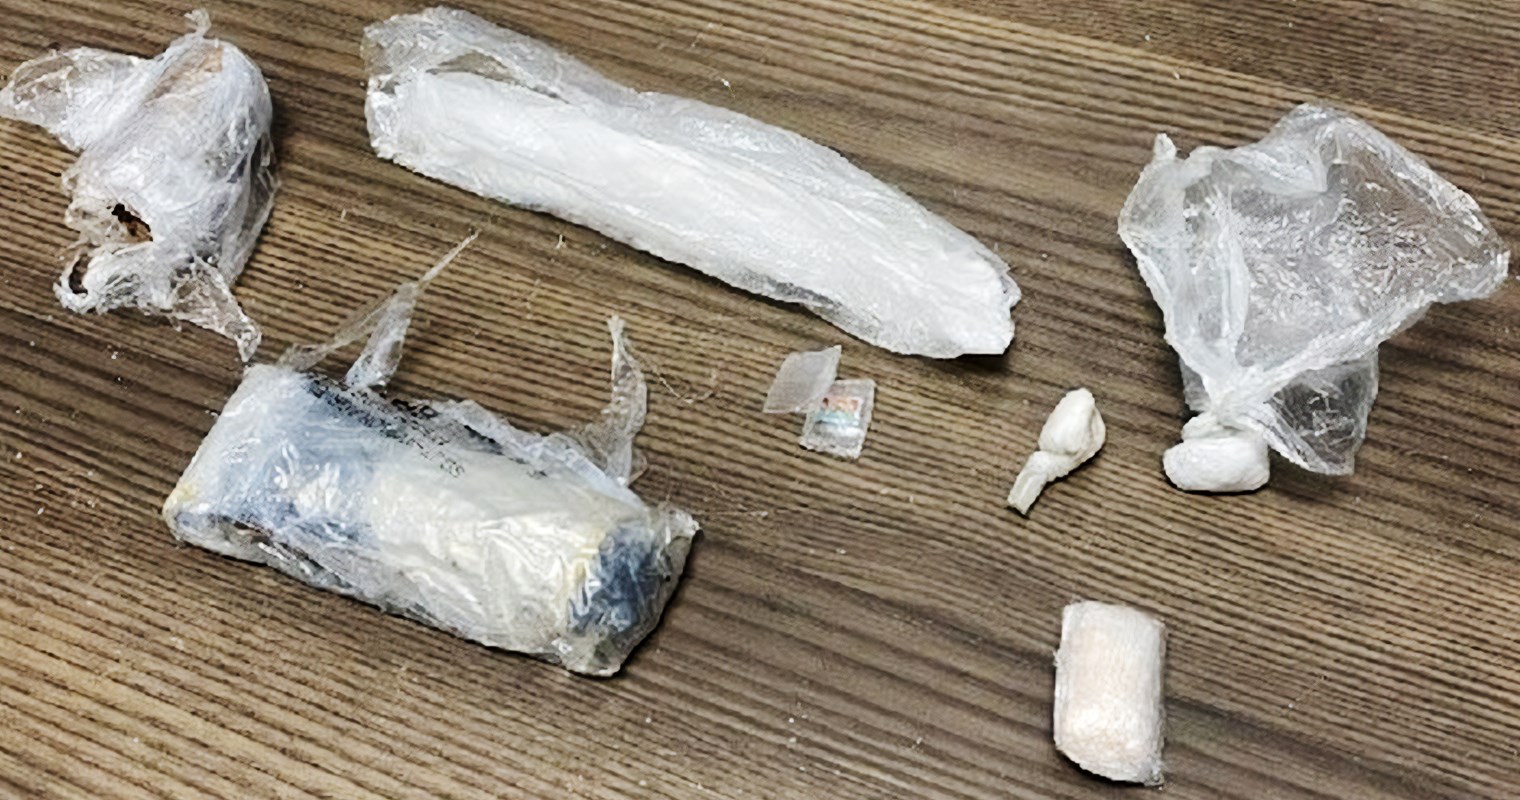 Confiscated contraband and drugs at Greenville Correctional Facility.